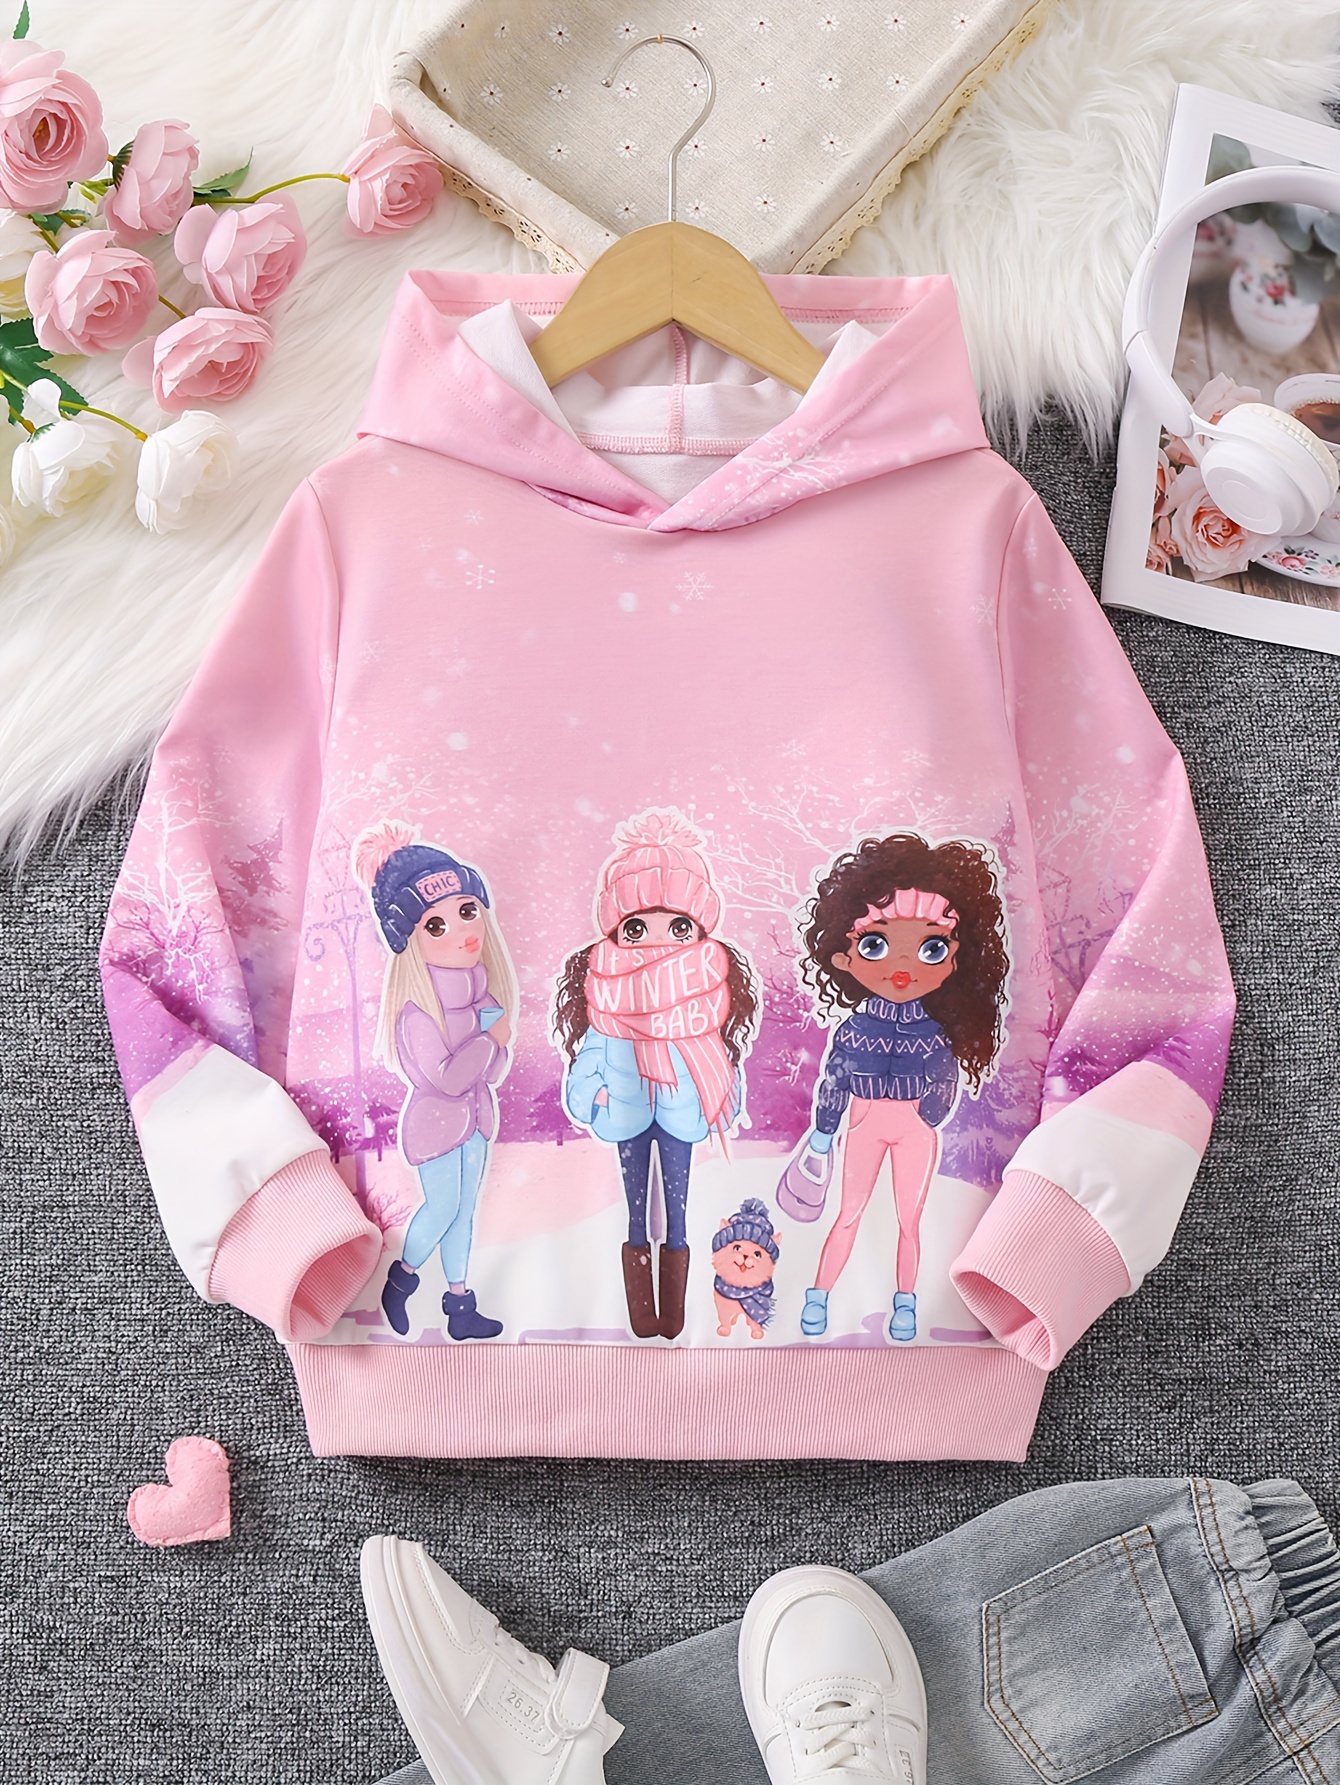 Anime Girl Graphic Print Hoodie for Girls, Girl's Casual Graphic Design Pullover Hooded Sweatshirt with Kangaroo Pocket Streetwear for Winter Fall